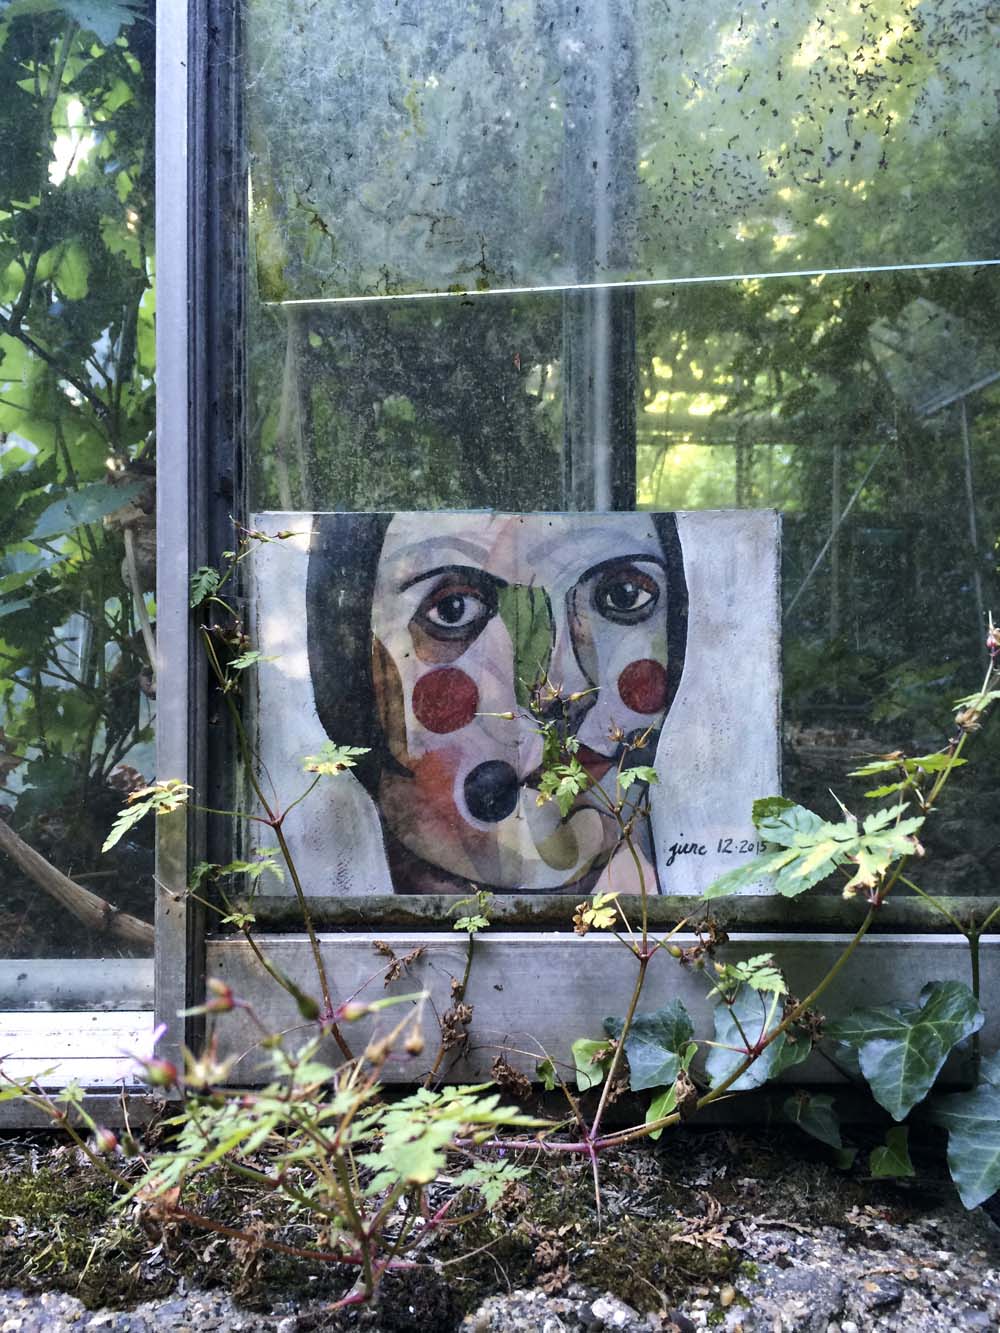 the third greenhouse is the emptiest and the most overgrown. this one resists leaving. she hides in between the panels but i finally manage to wrest her from the panes